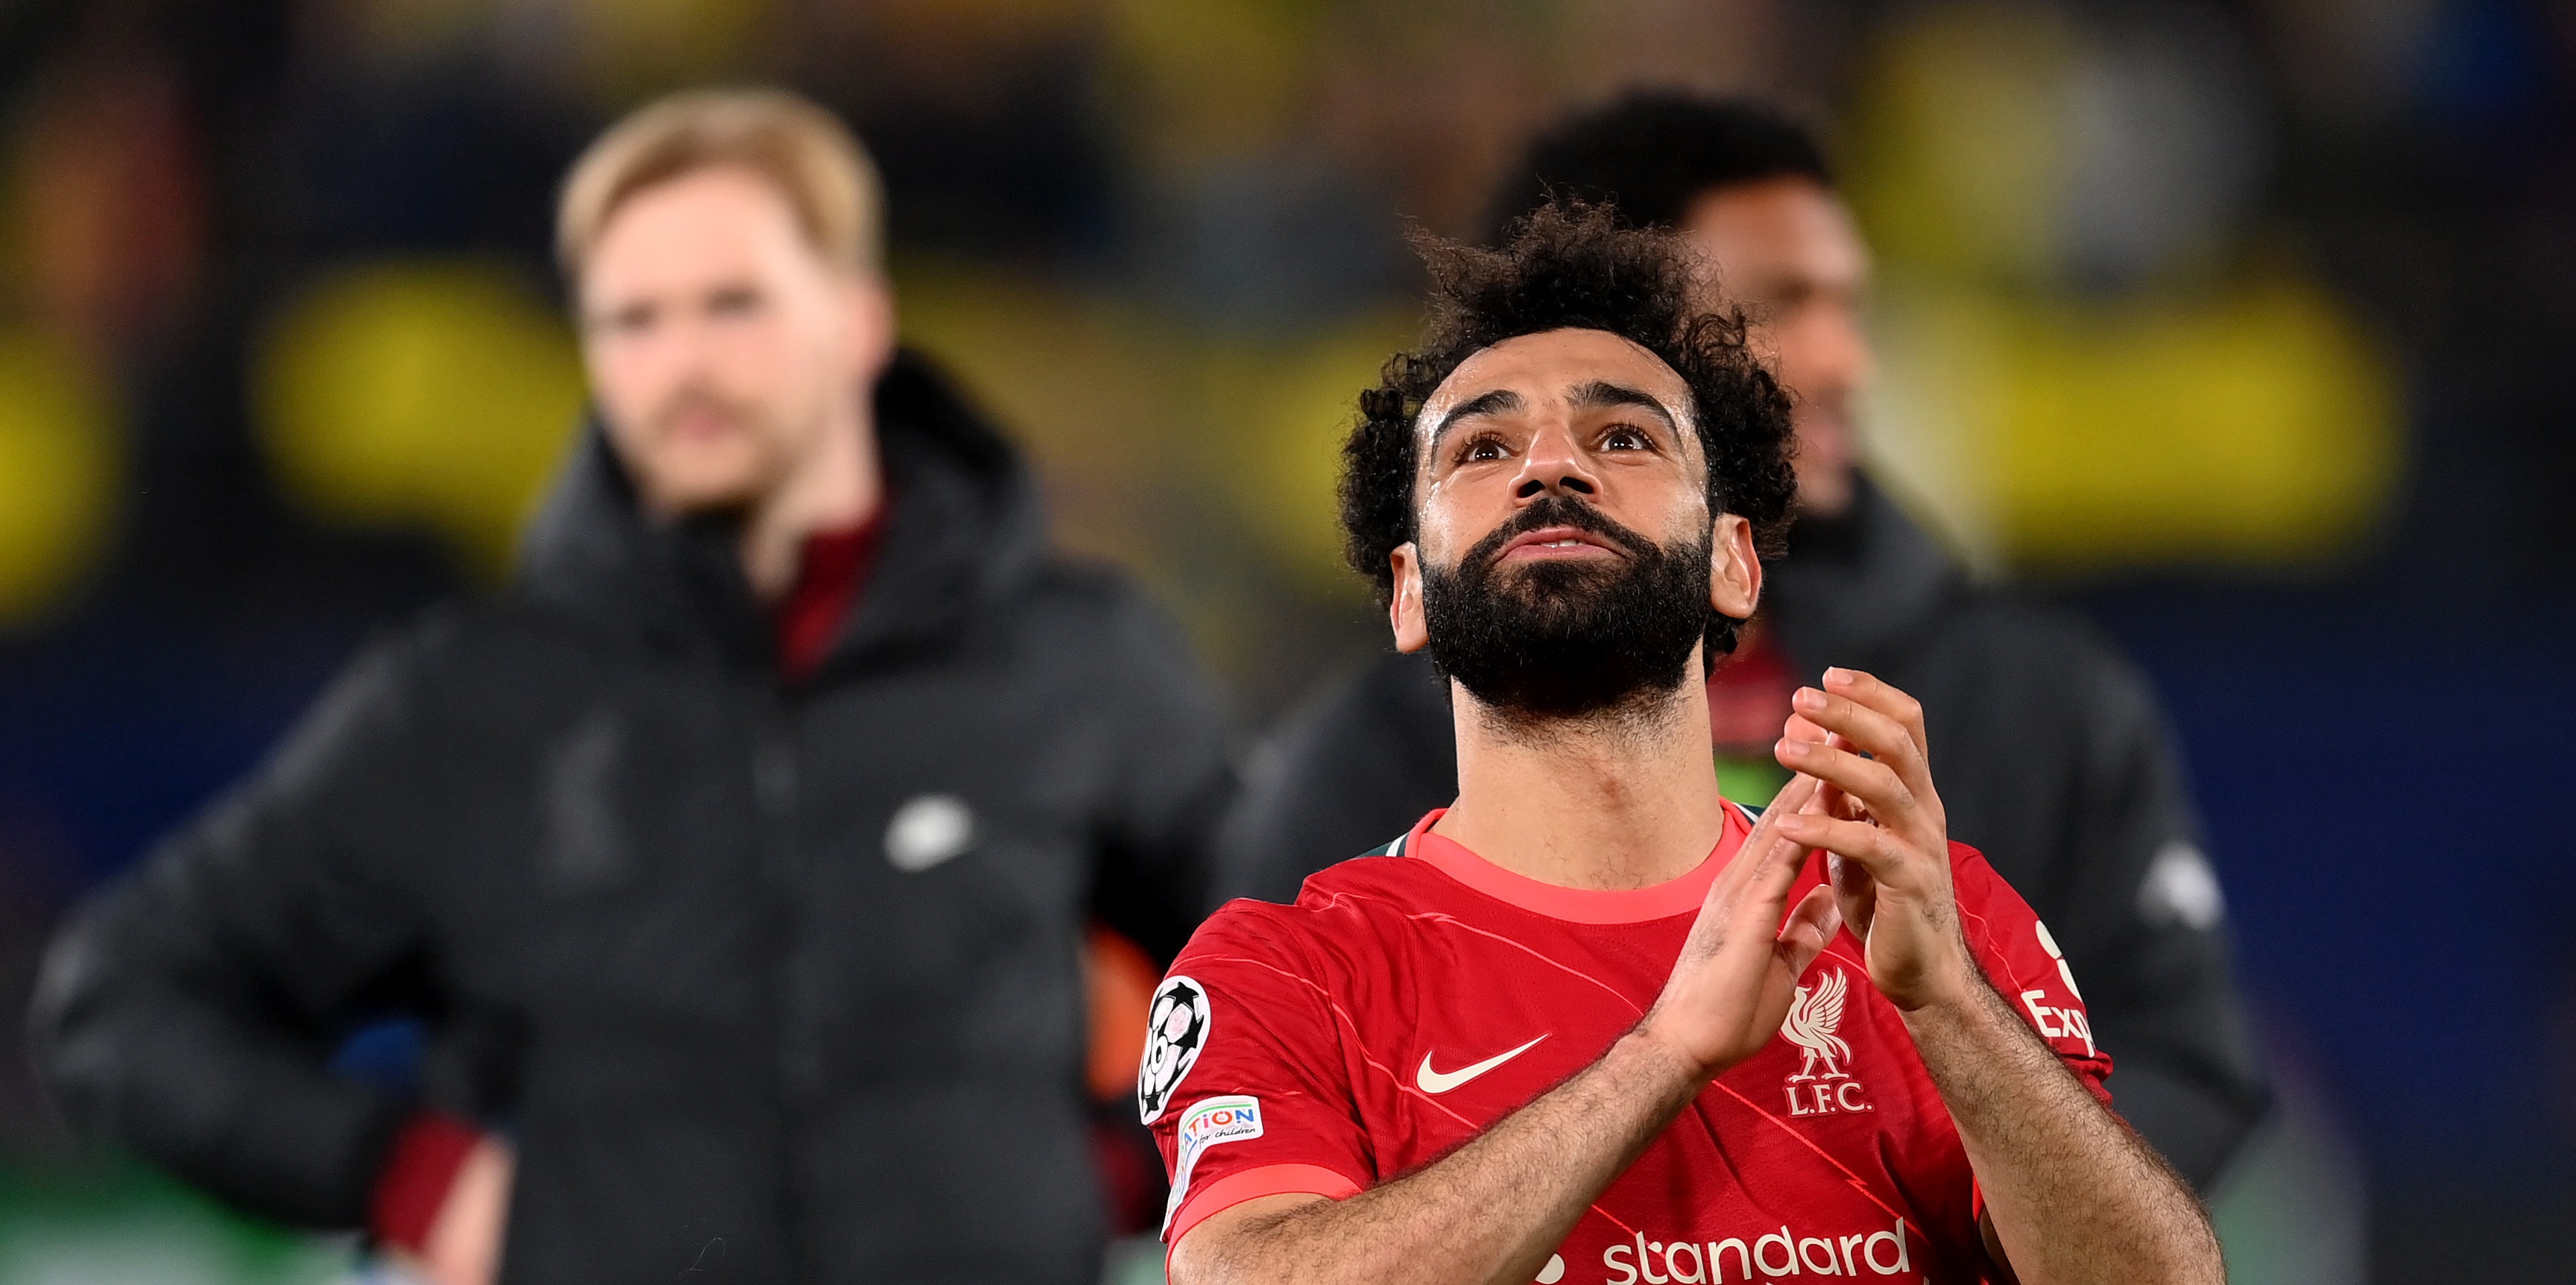 ‘No way!’ – Ex-Premier League forward’s confident Mo Salah admission will excite Liverpool supporters